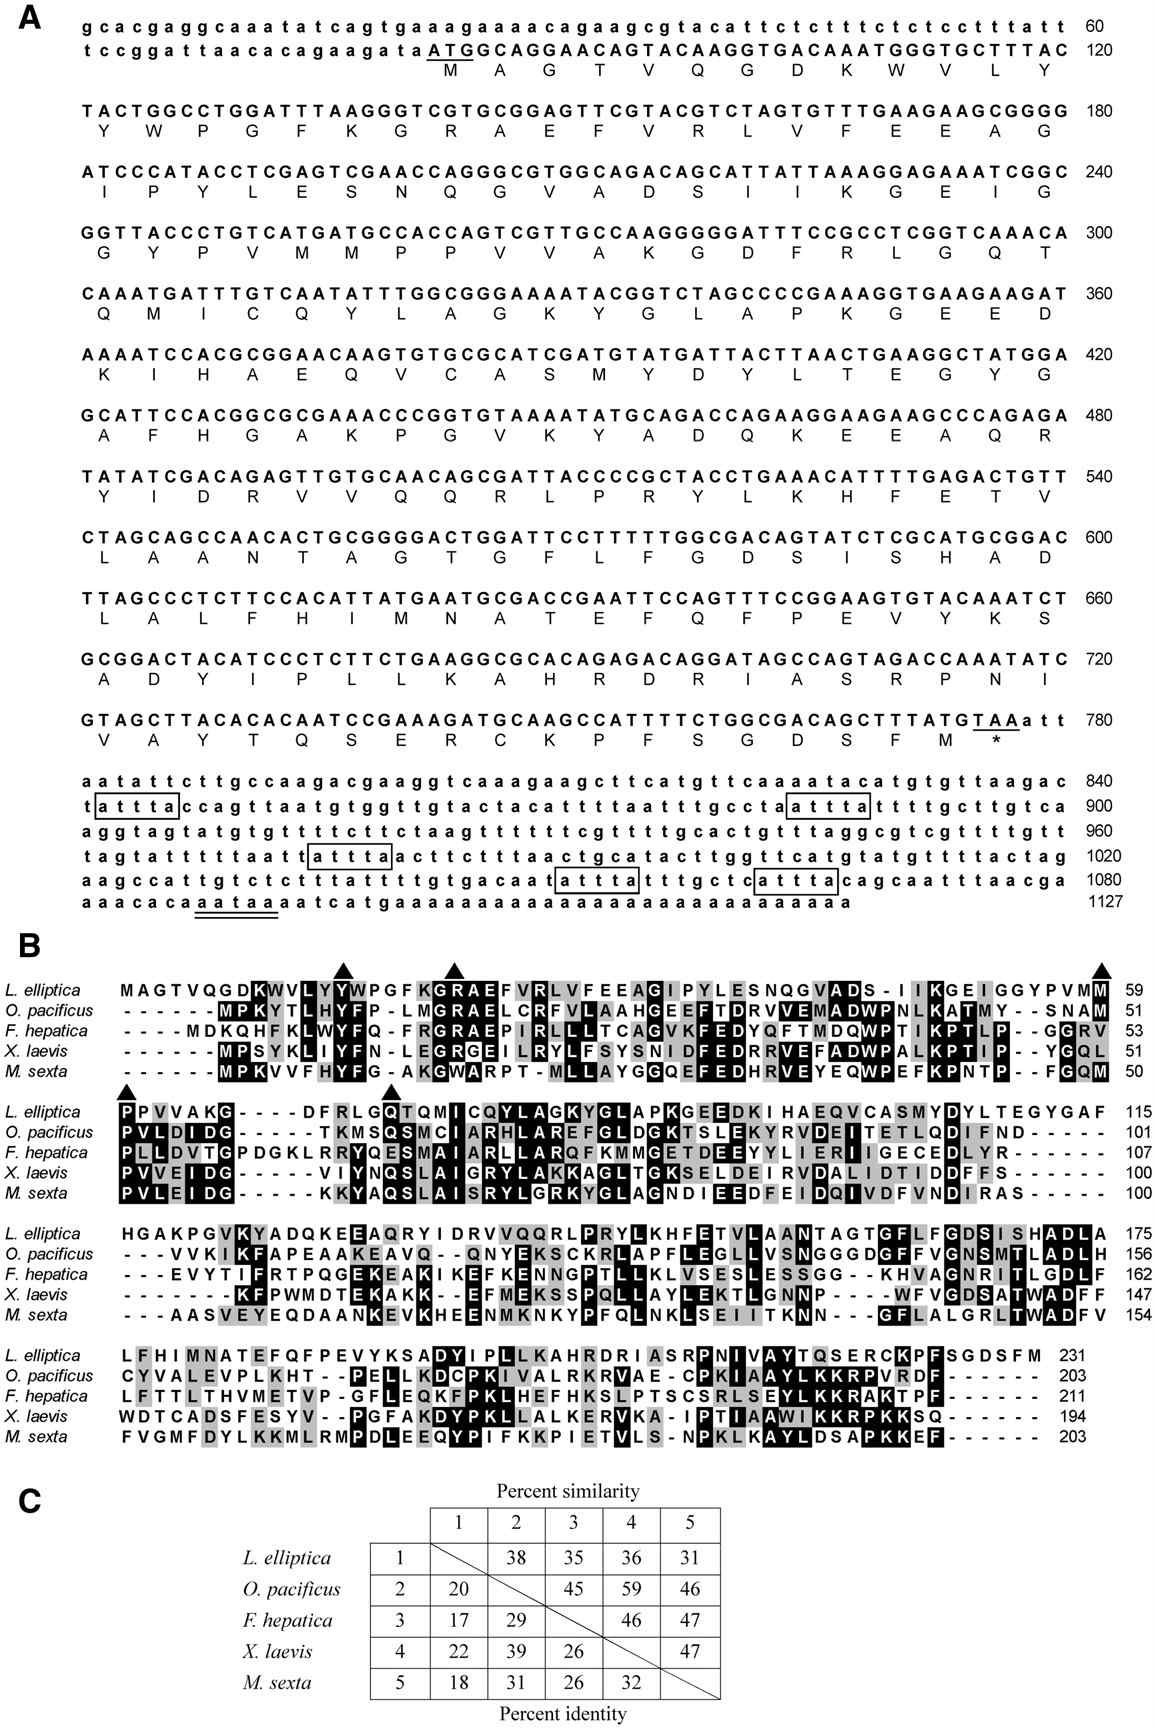 cDNA and deduced protein sequences of the sigma class glutathioneS-transferase of Laternula elliptica (accession number in GenBank: FJ615308).